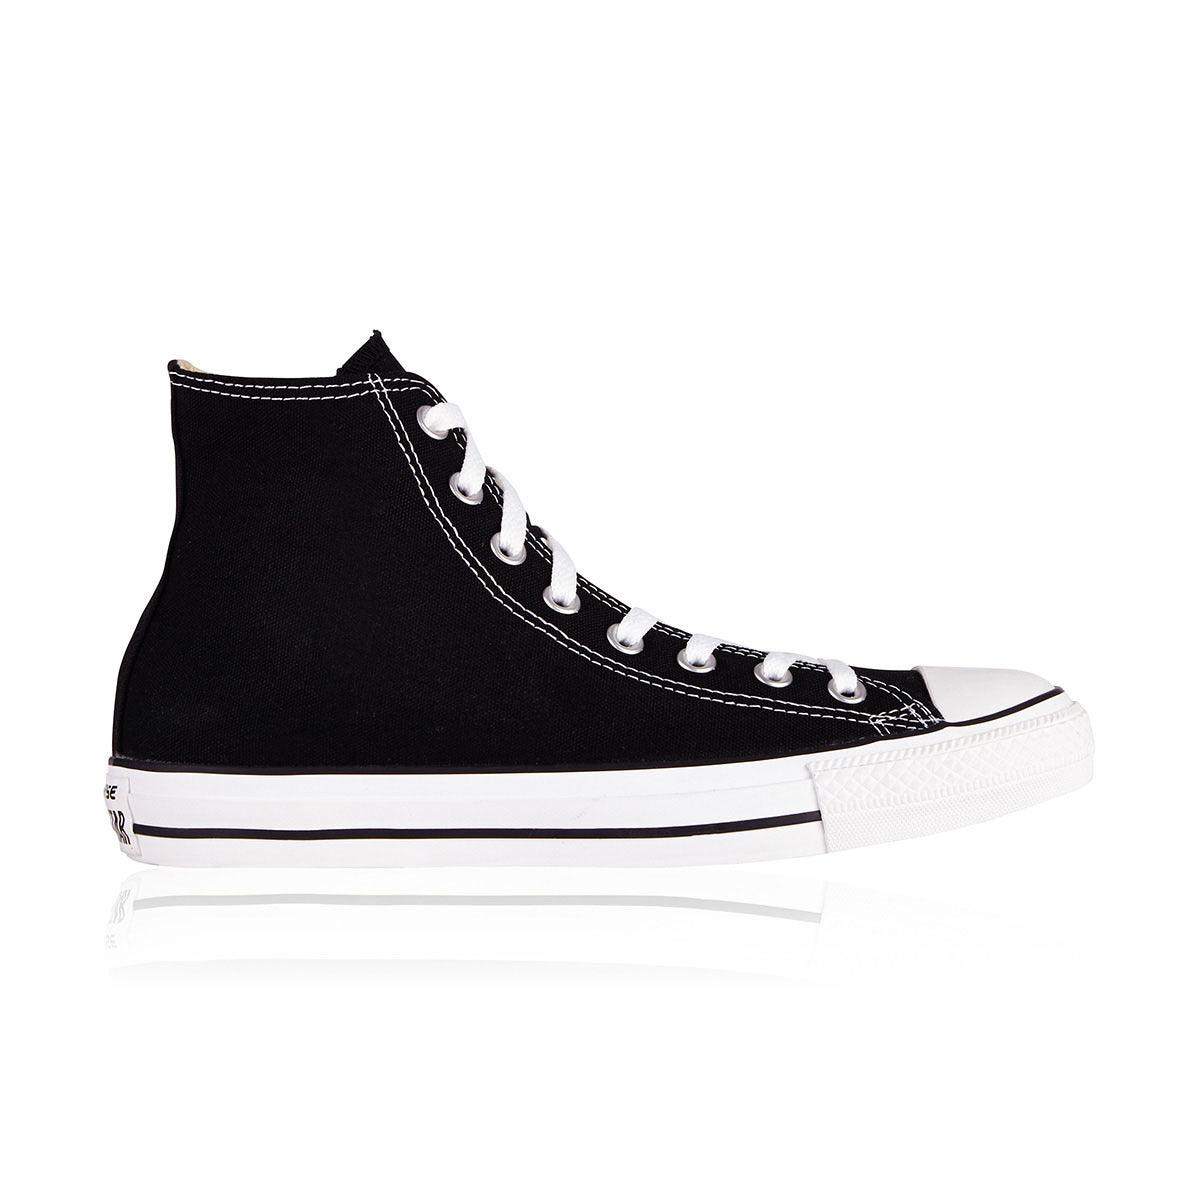 How To Spot Fake Converse: Easy Ways Shoebly, 46% OFF